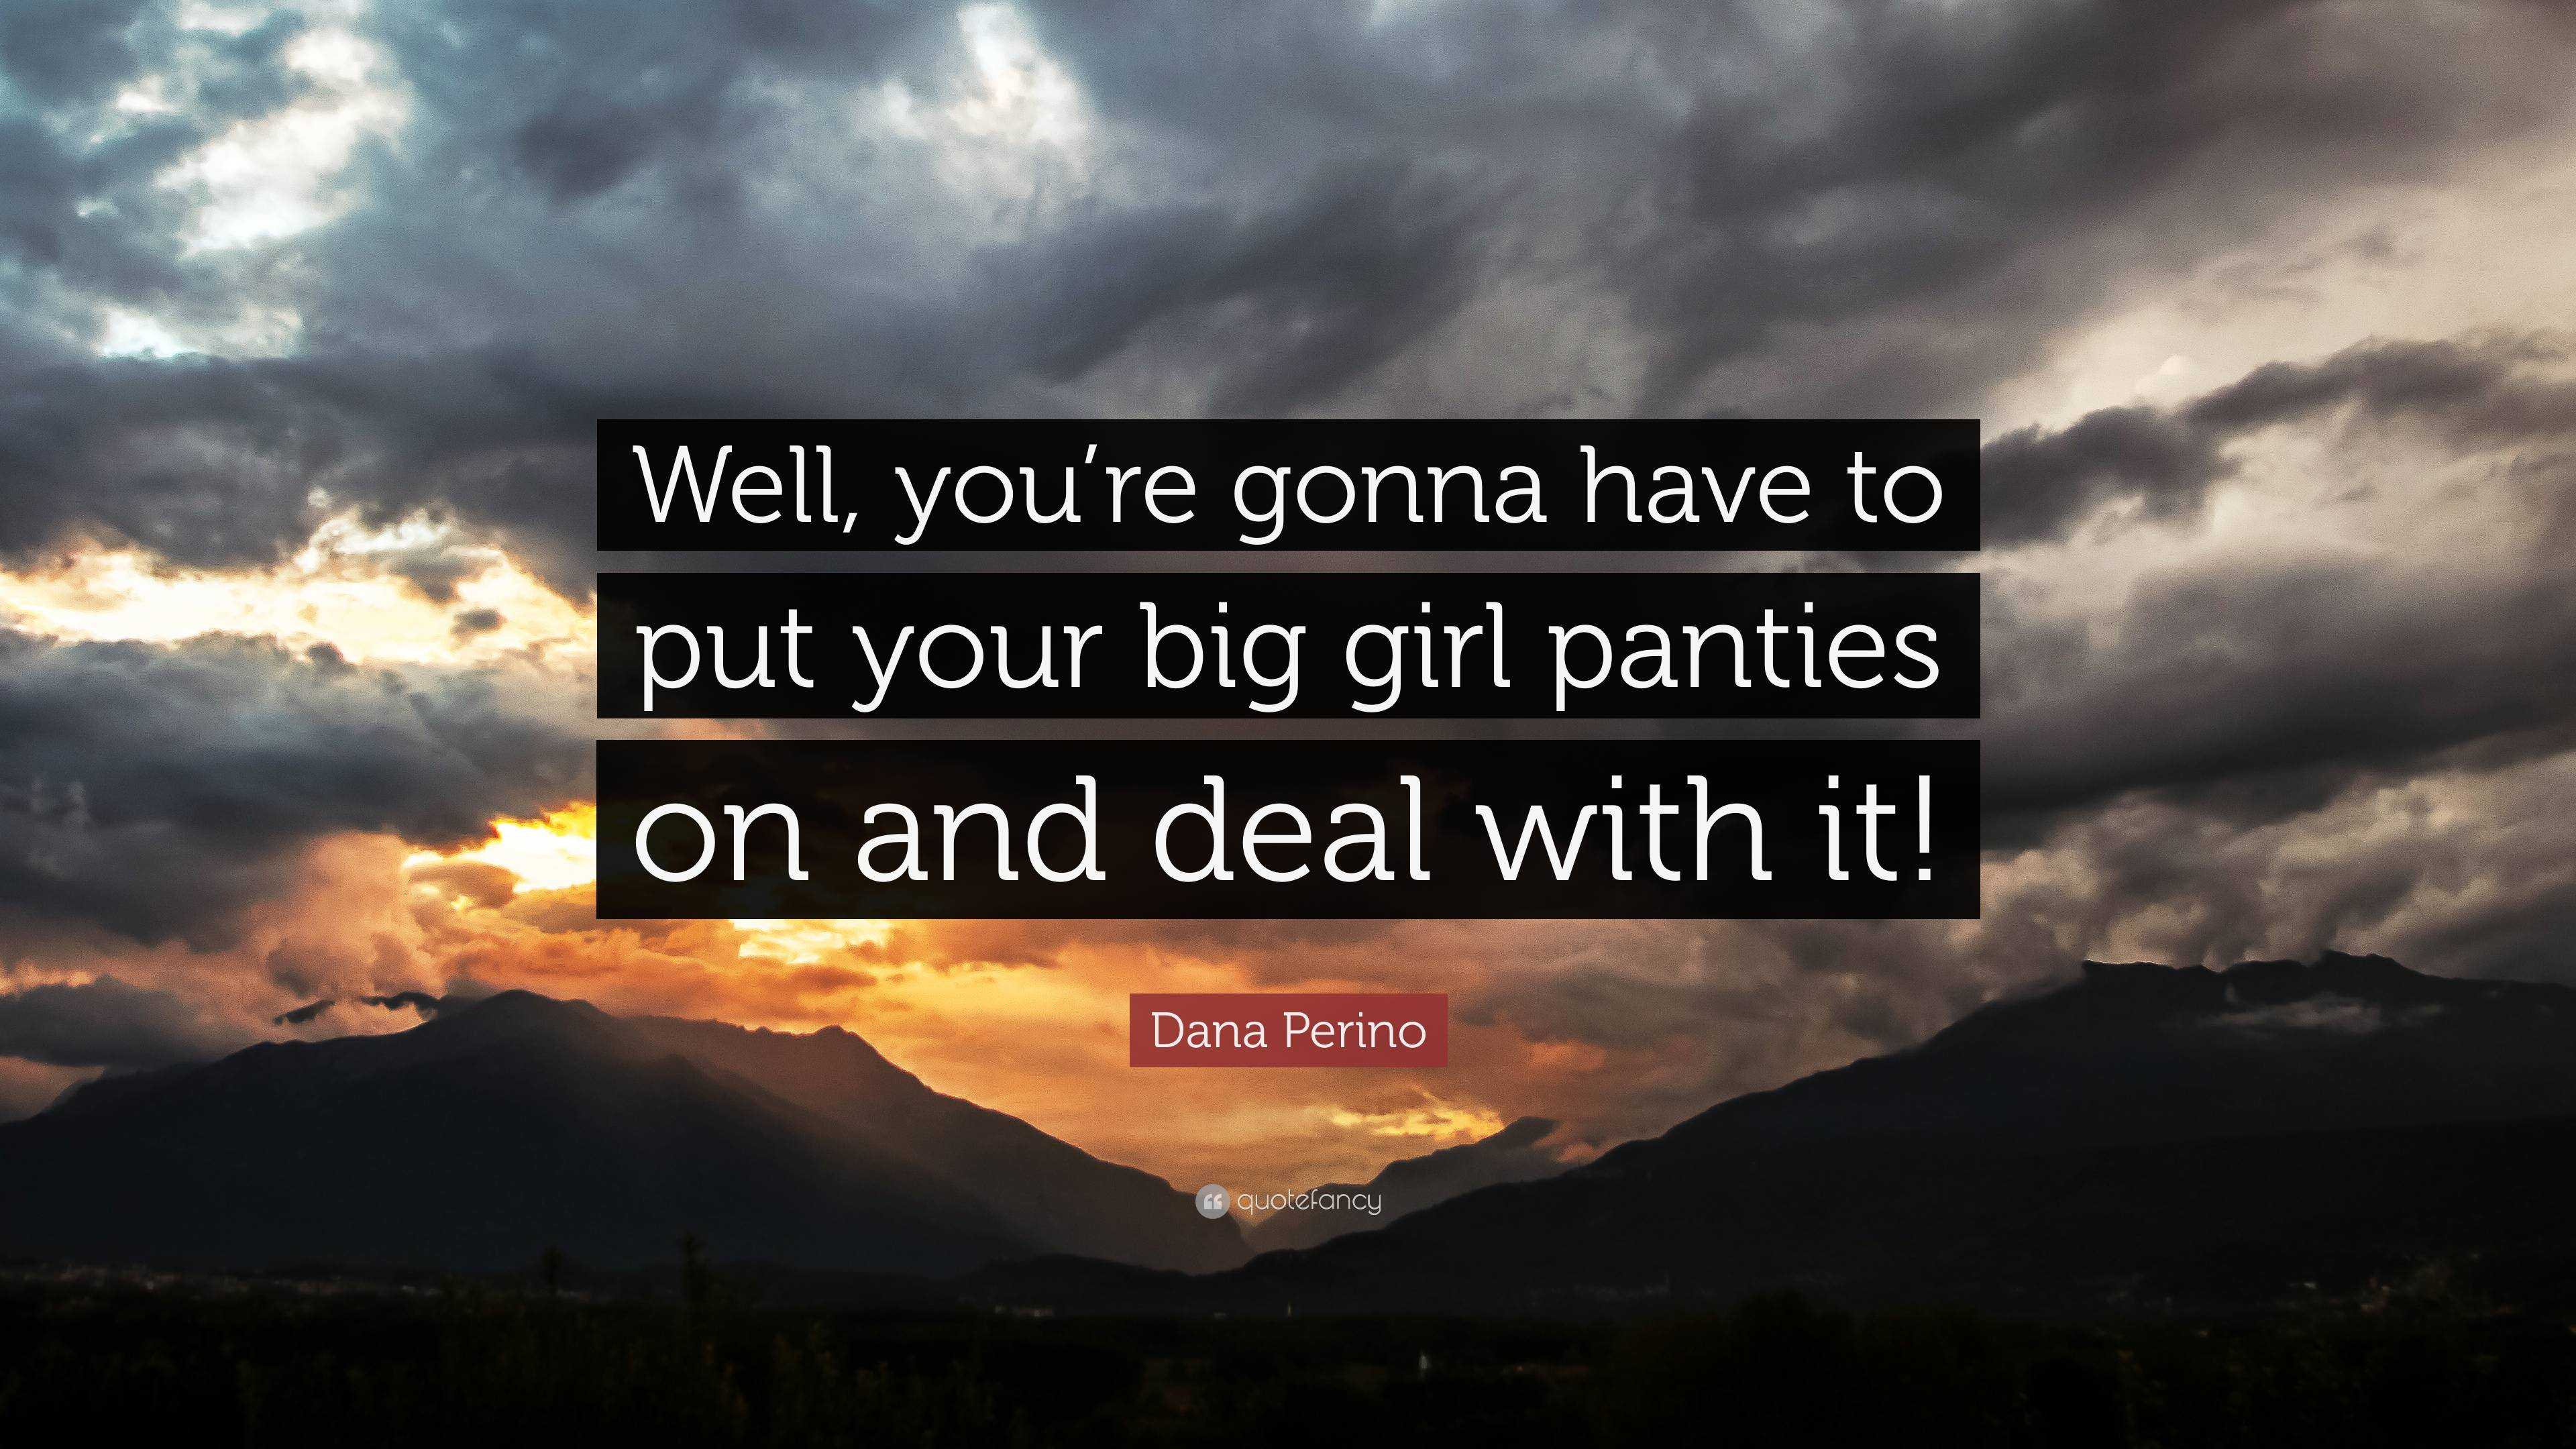 Dana Perino Quote: “Well, you're gonna have to put your big girl panties on  and